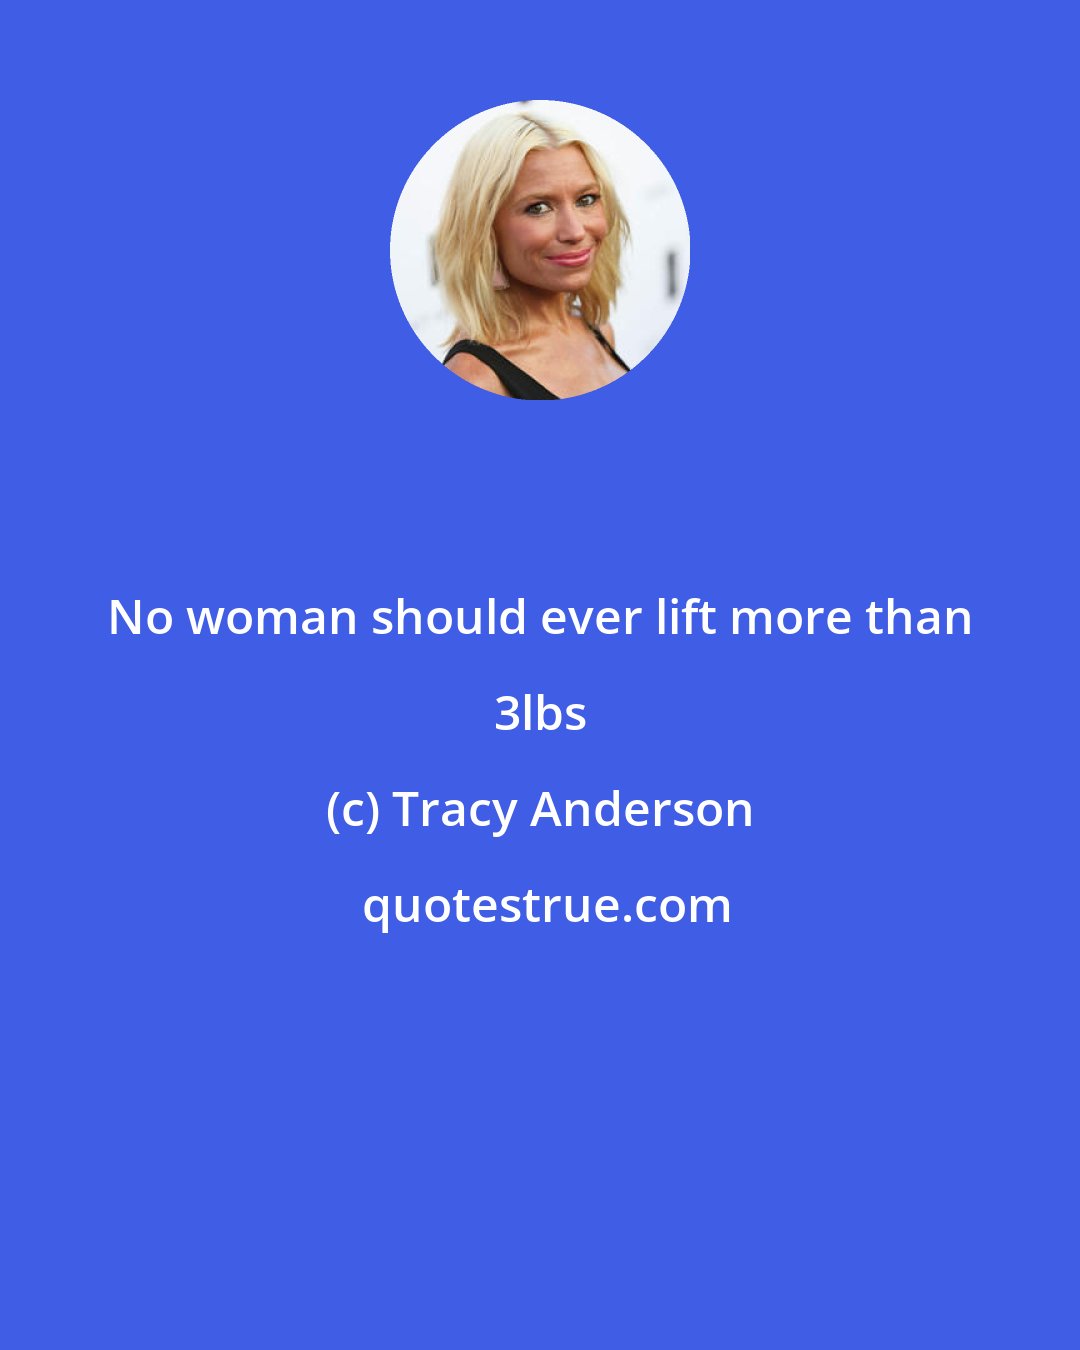 Tracy Anderson: No woman should ever lift more than 3lbs